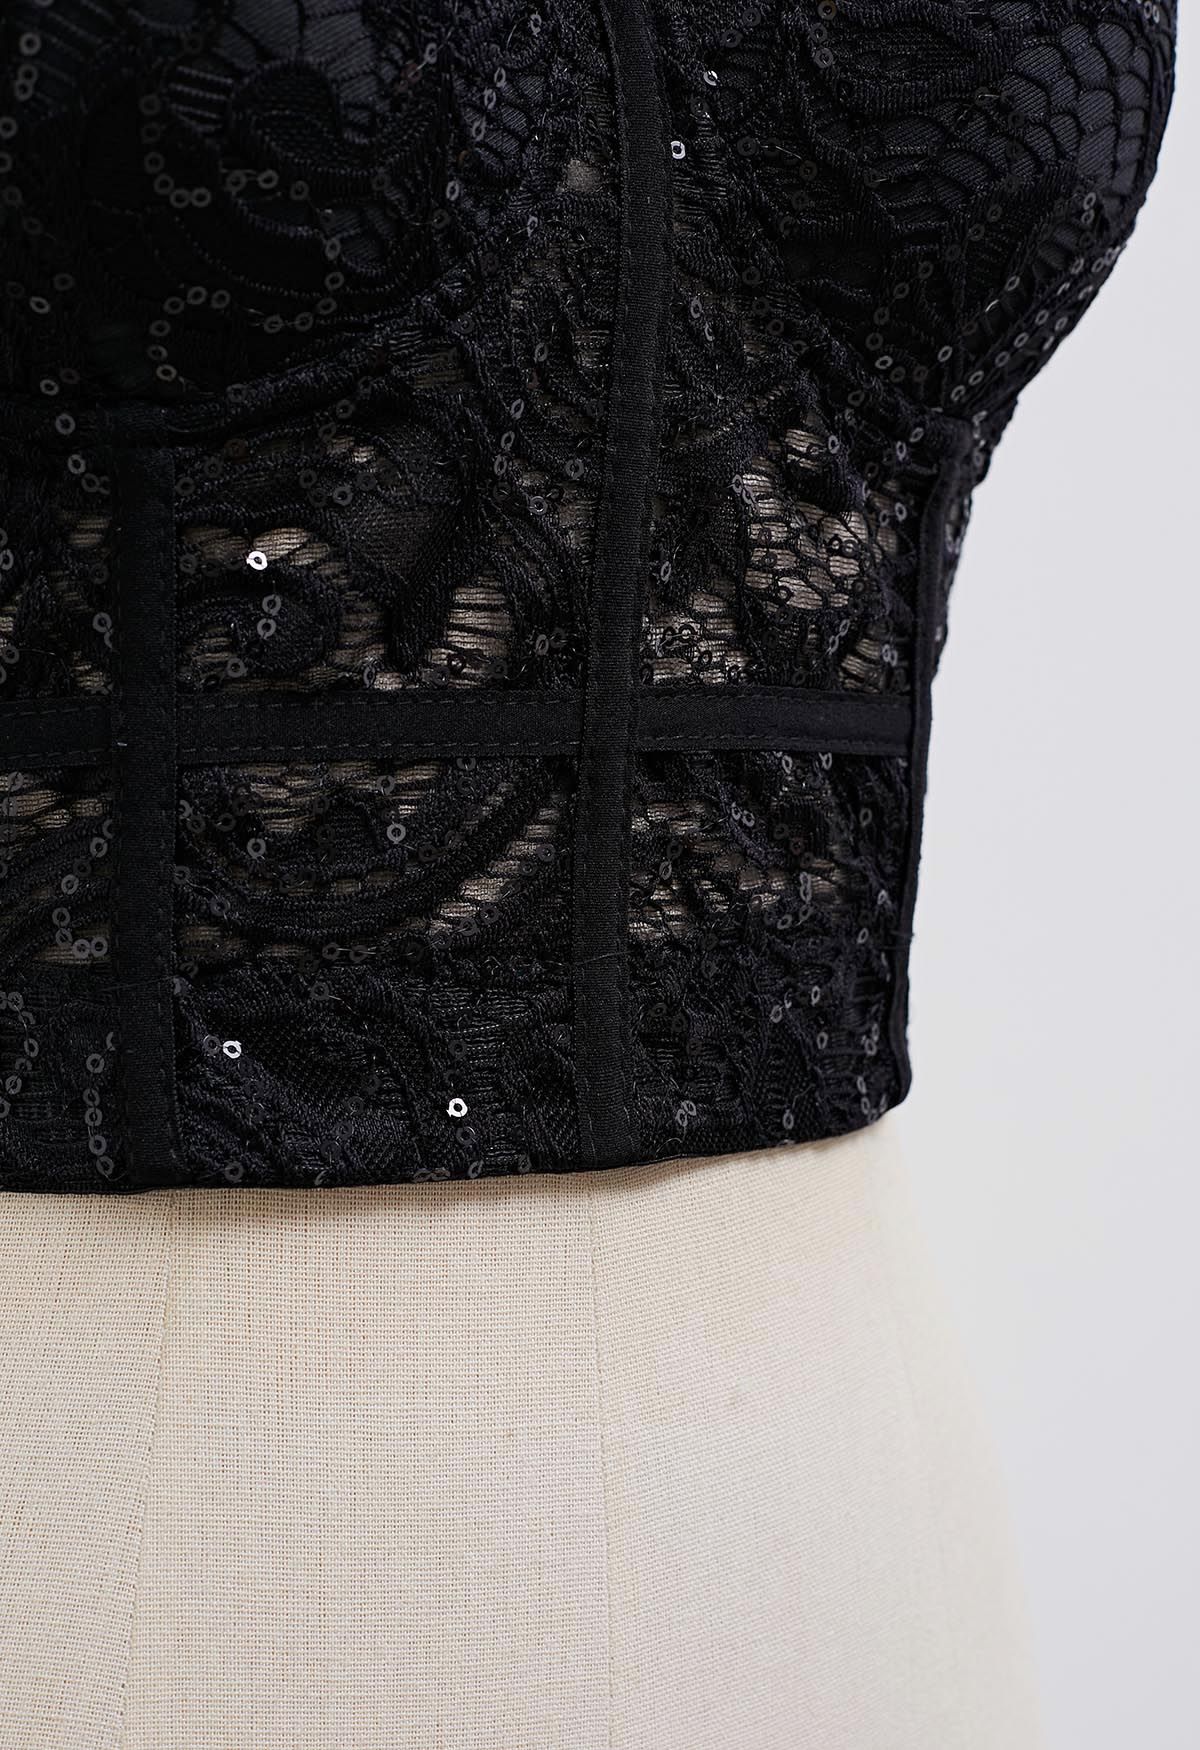 Sequined Lace Bustier Crop Top in Black